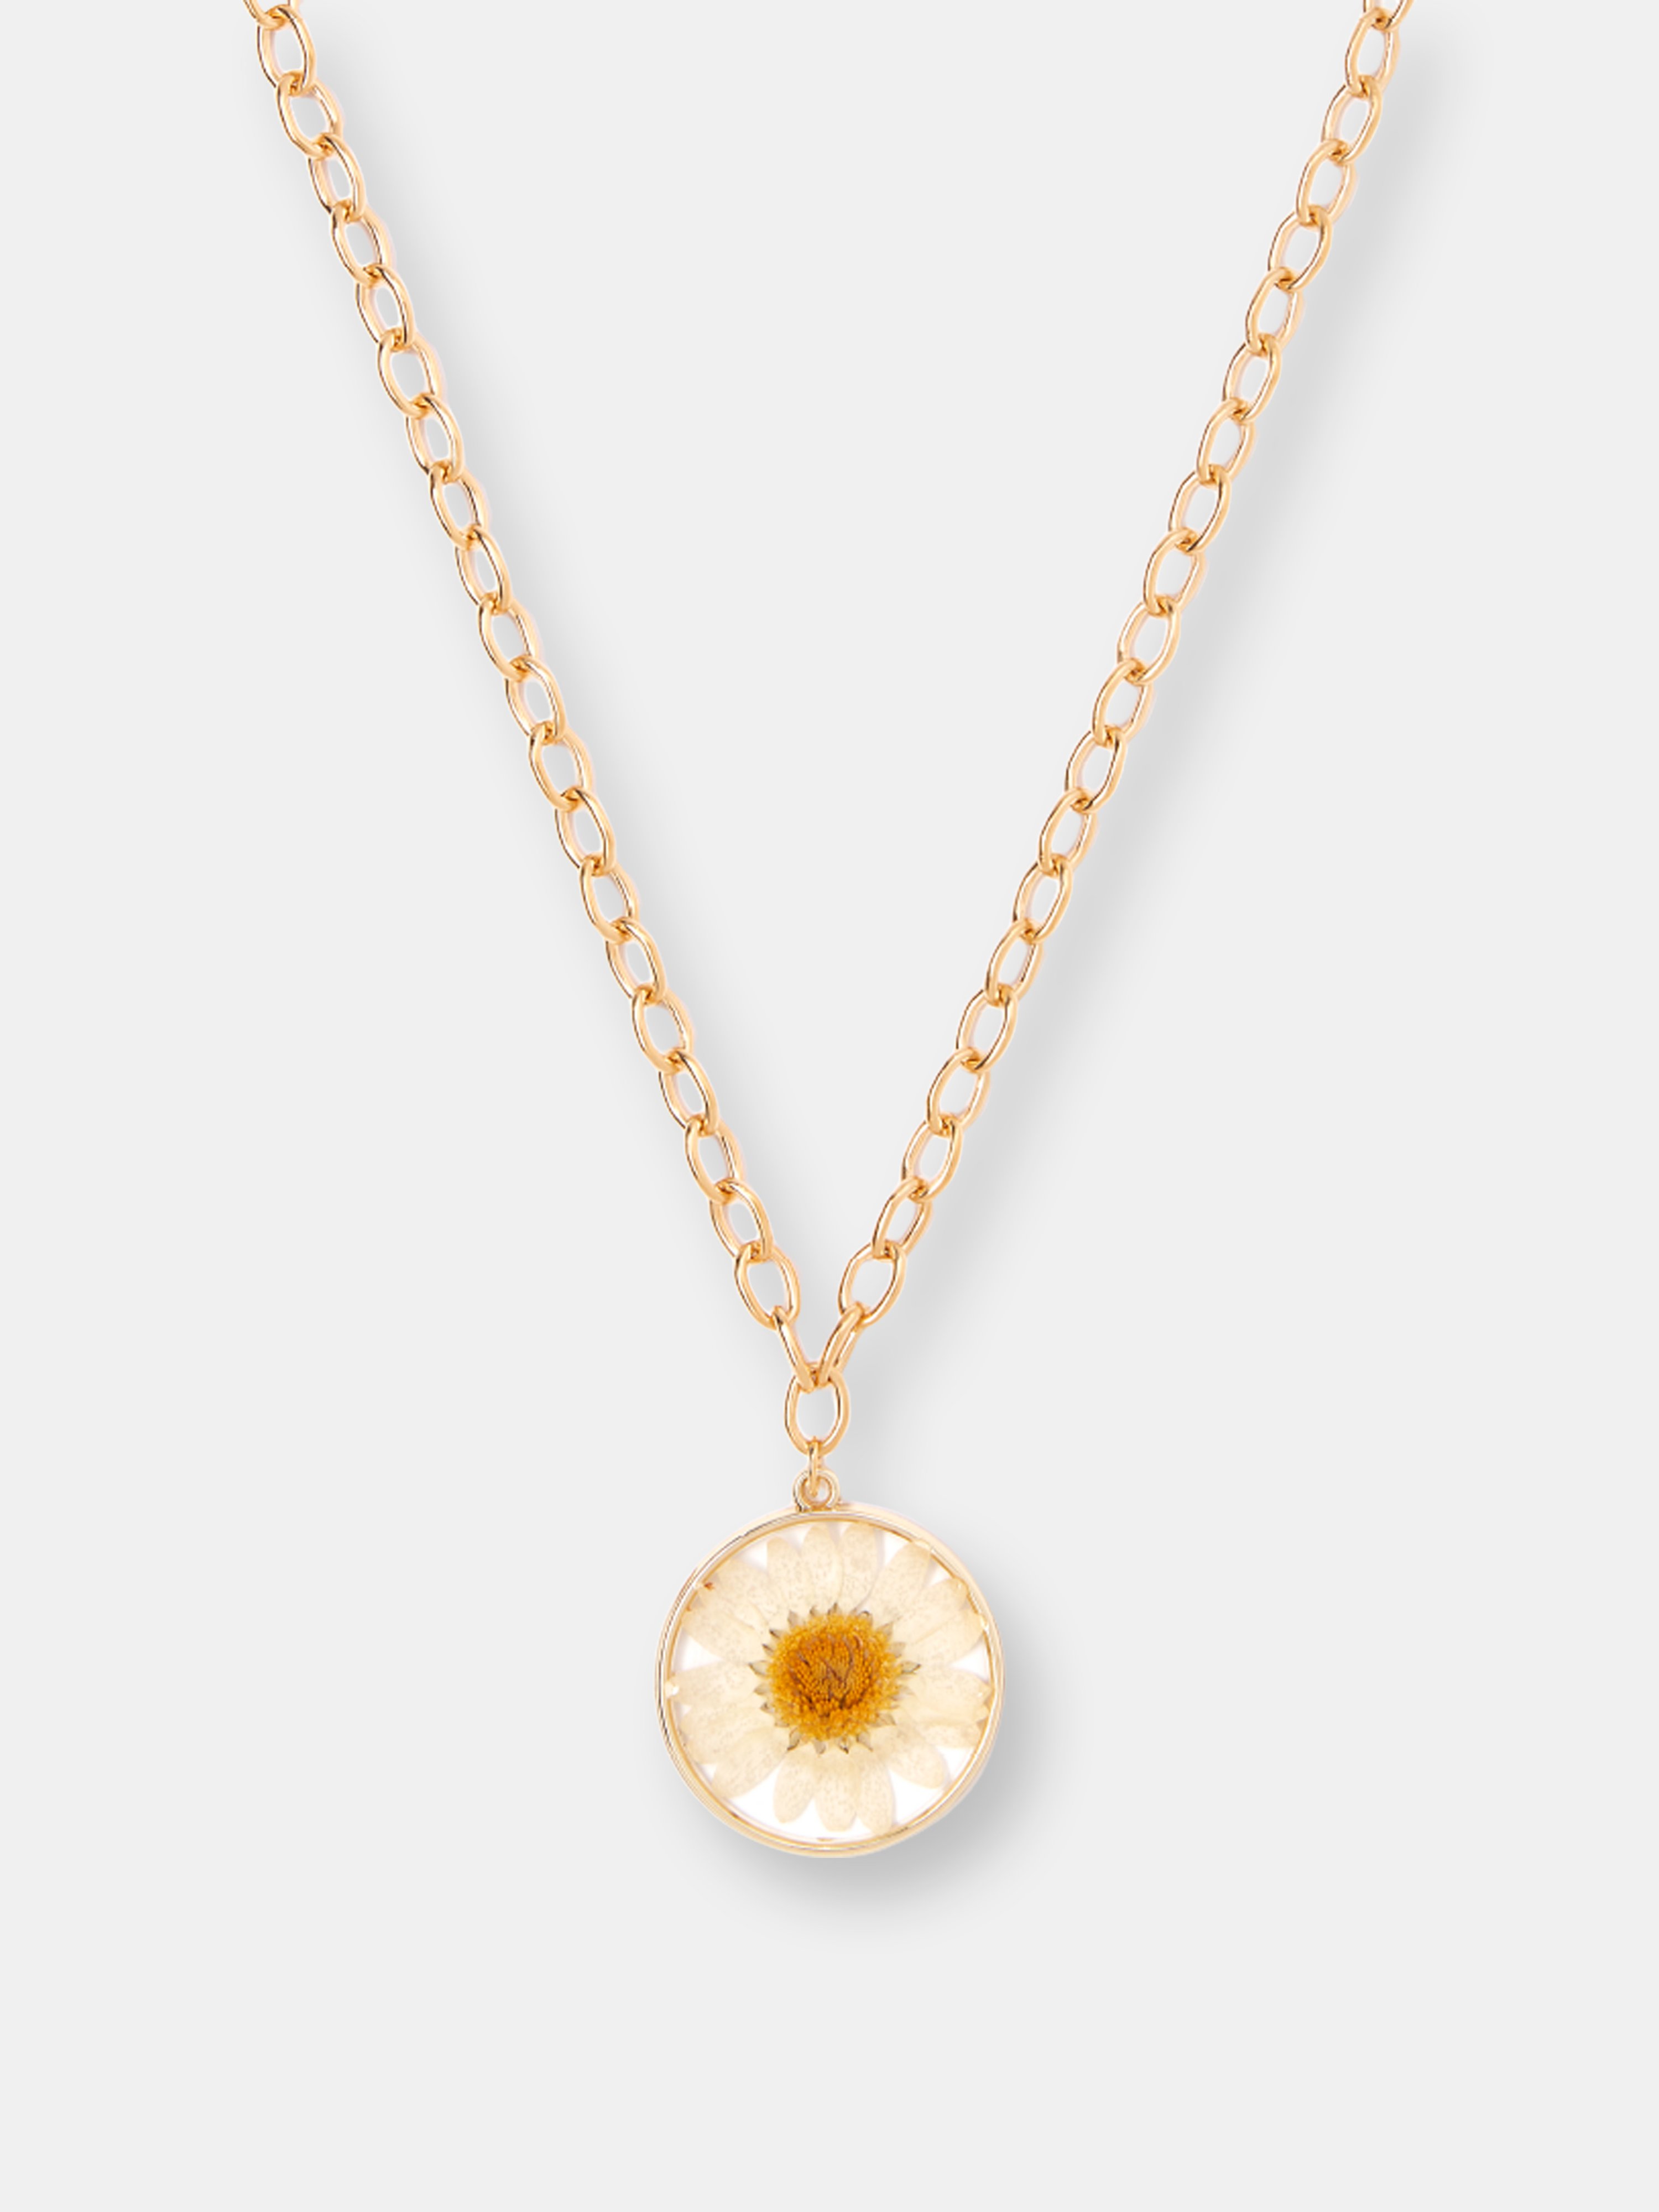 TESS + TRICIA TESS + TRICIA LARGE WHITE DAISY NECKLACE